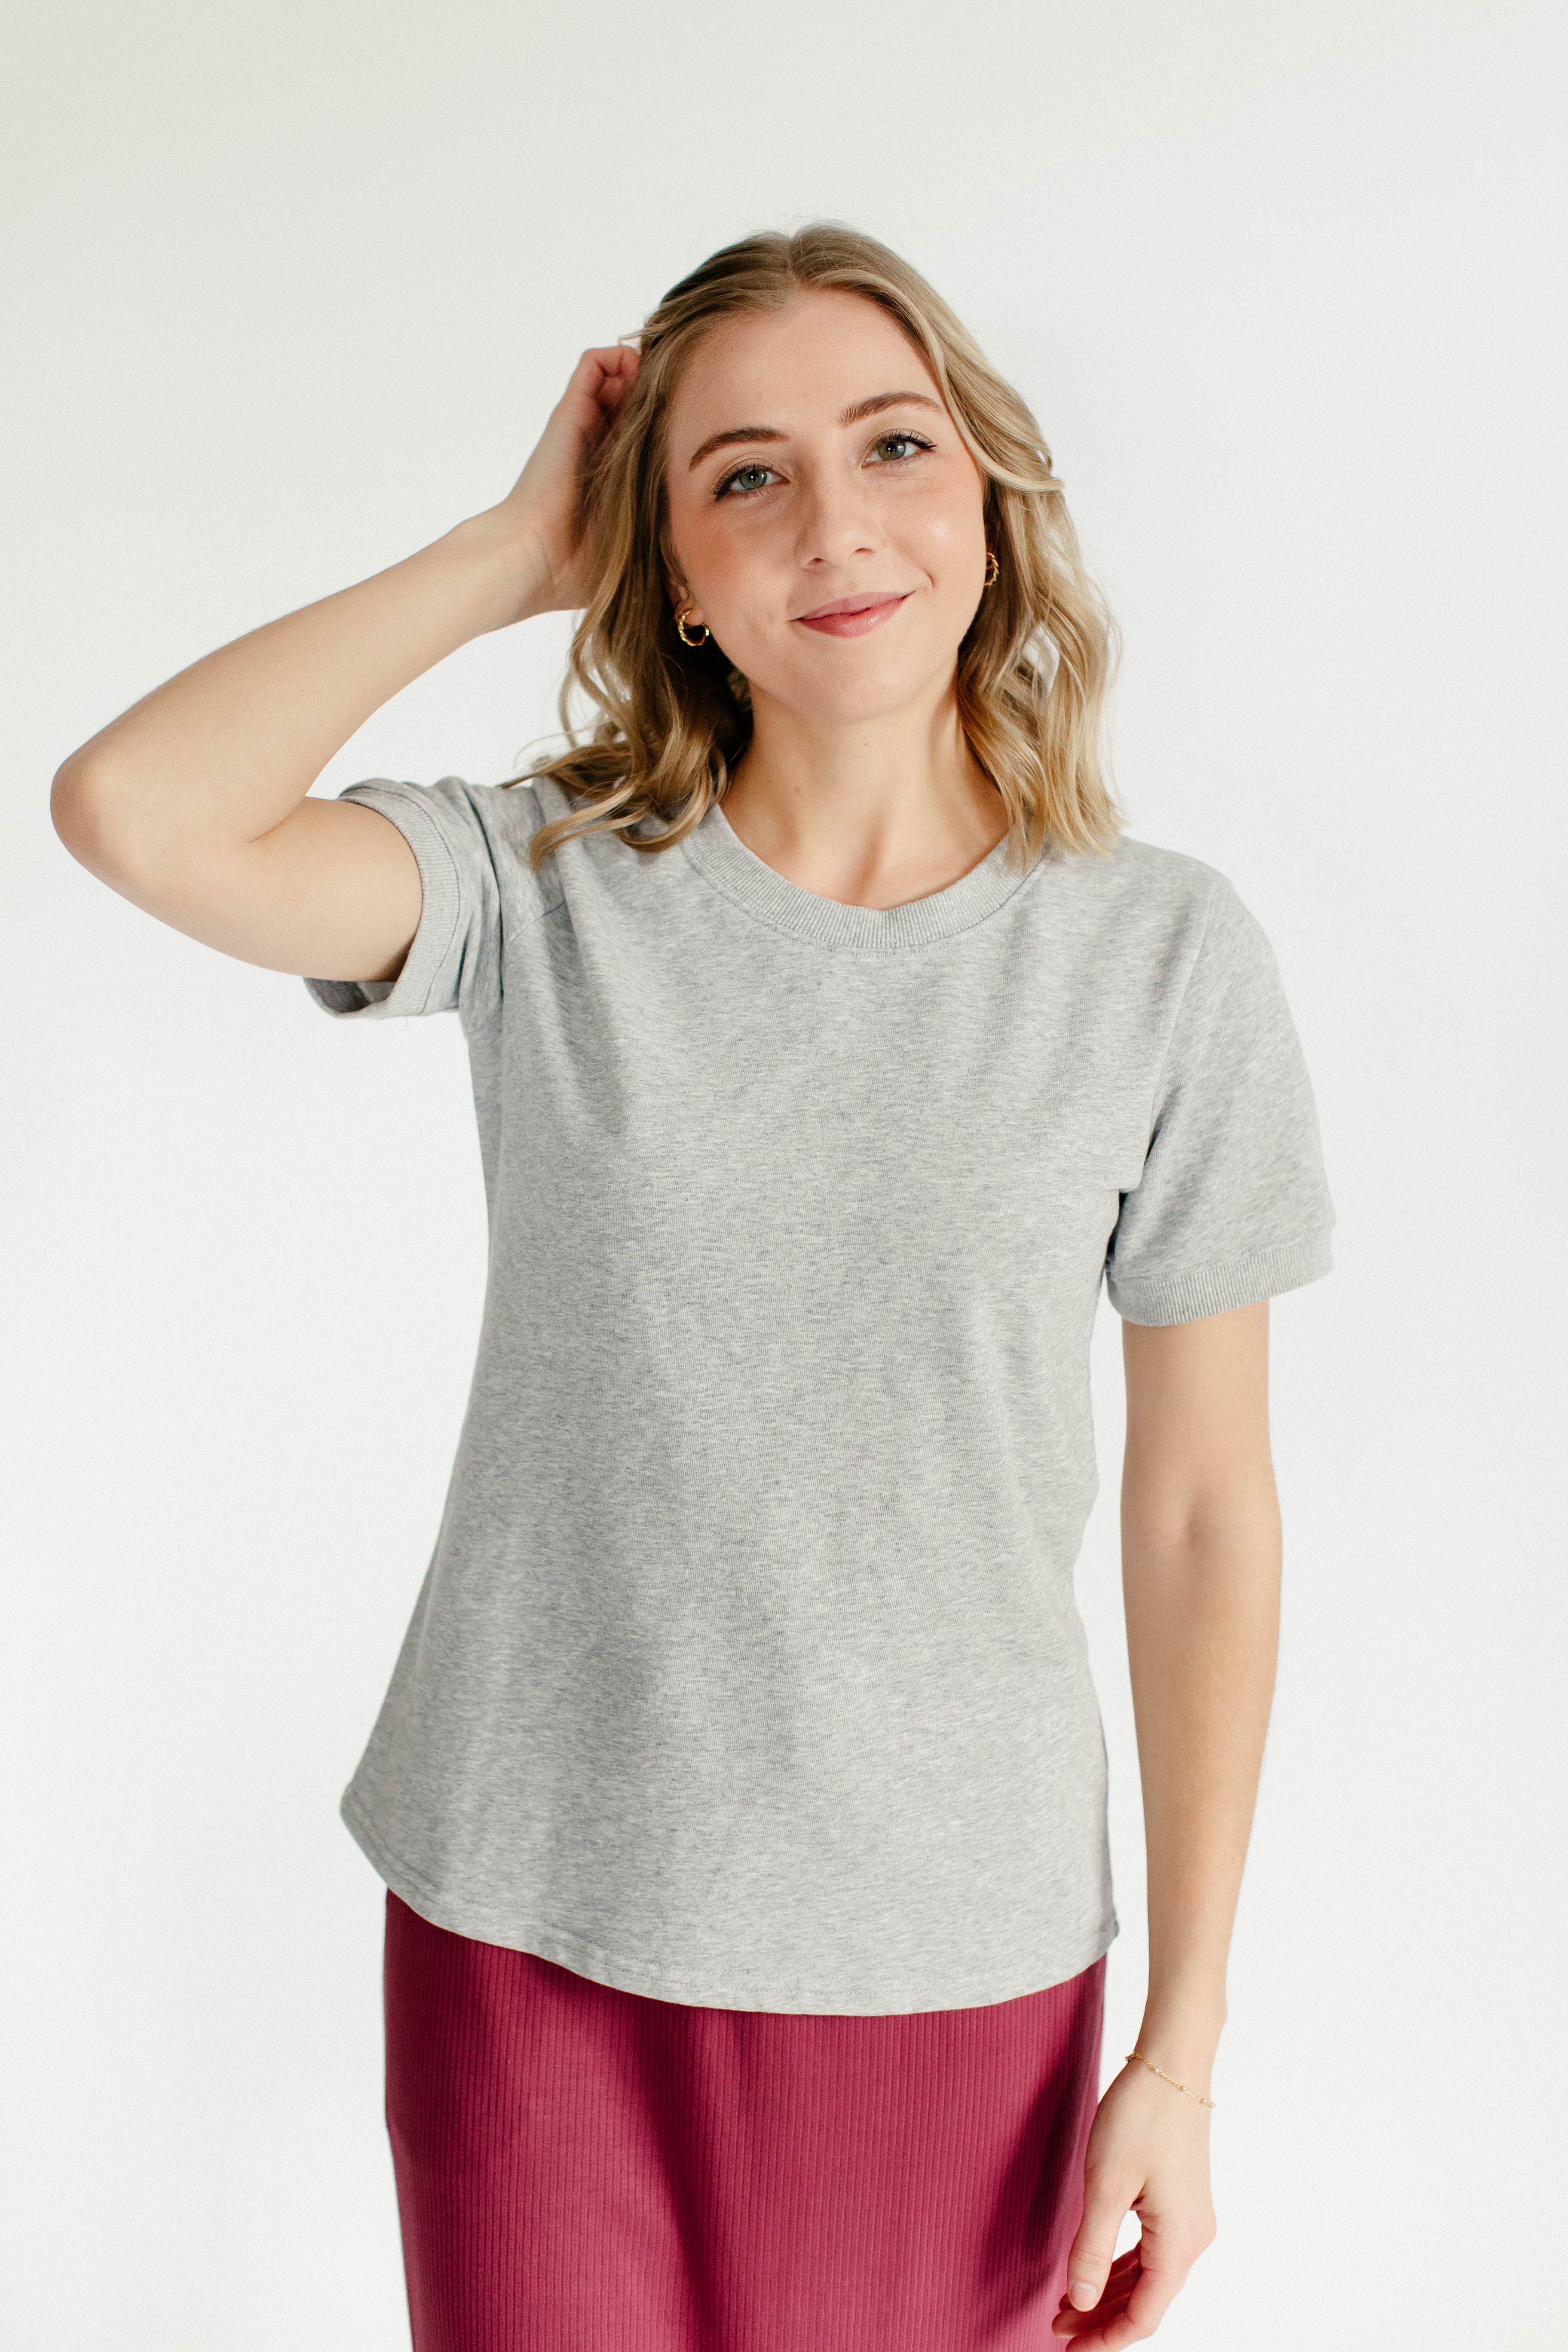 Modest Tops & Blouses | Women's Shirts | The Main Street Exchange – Page 4